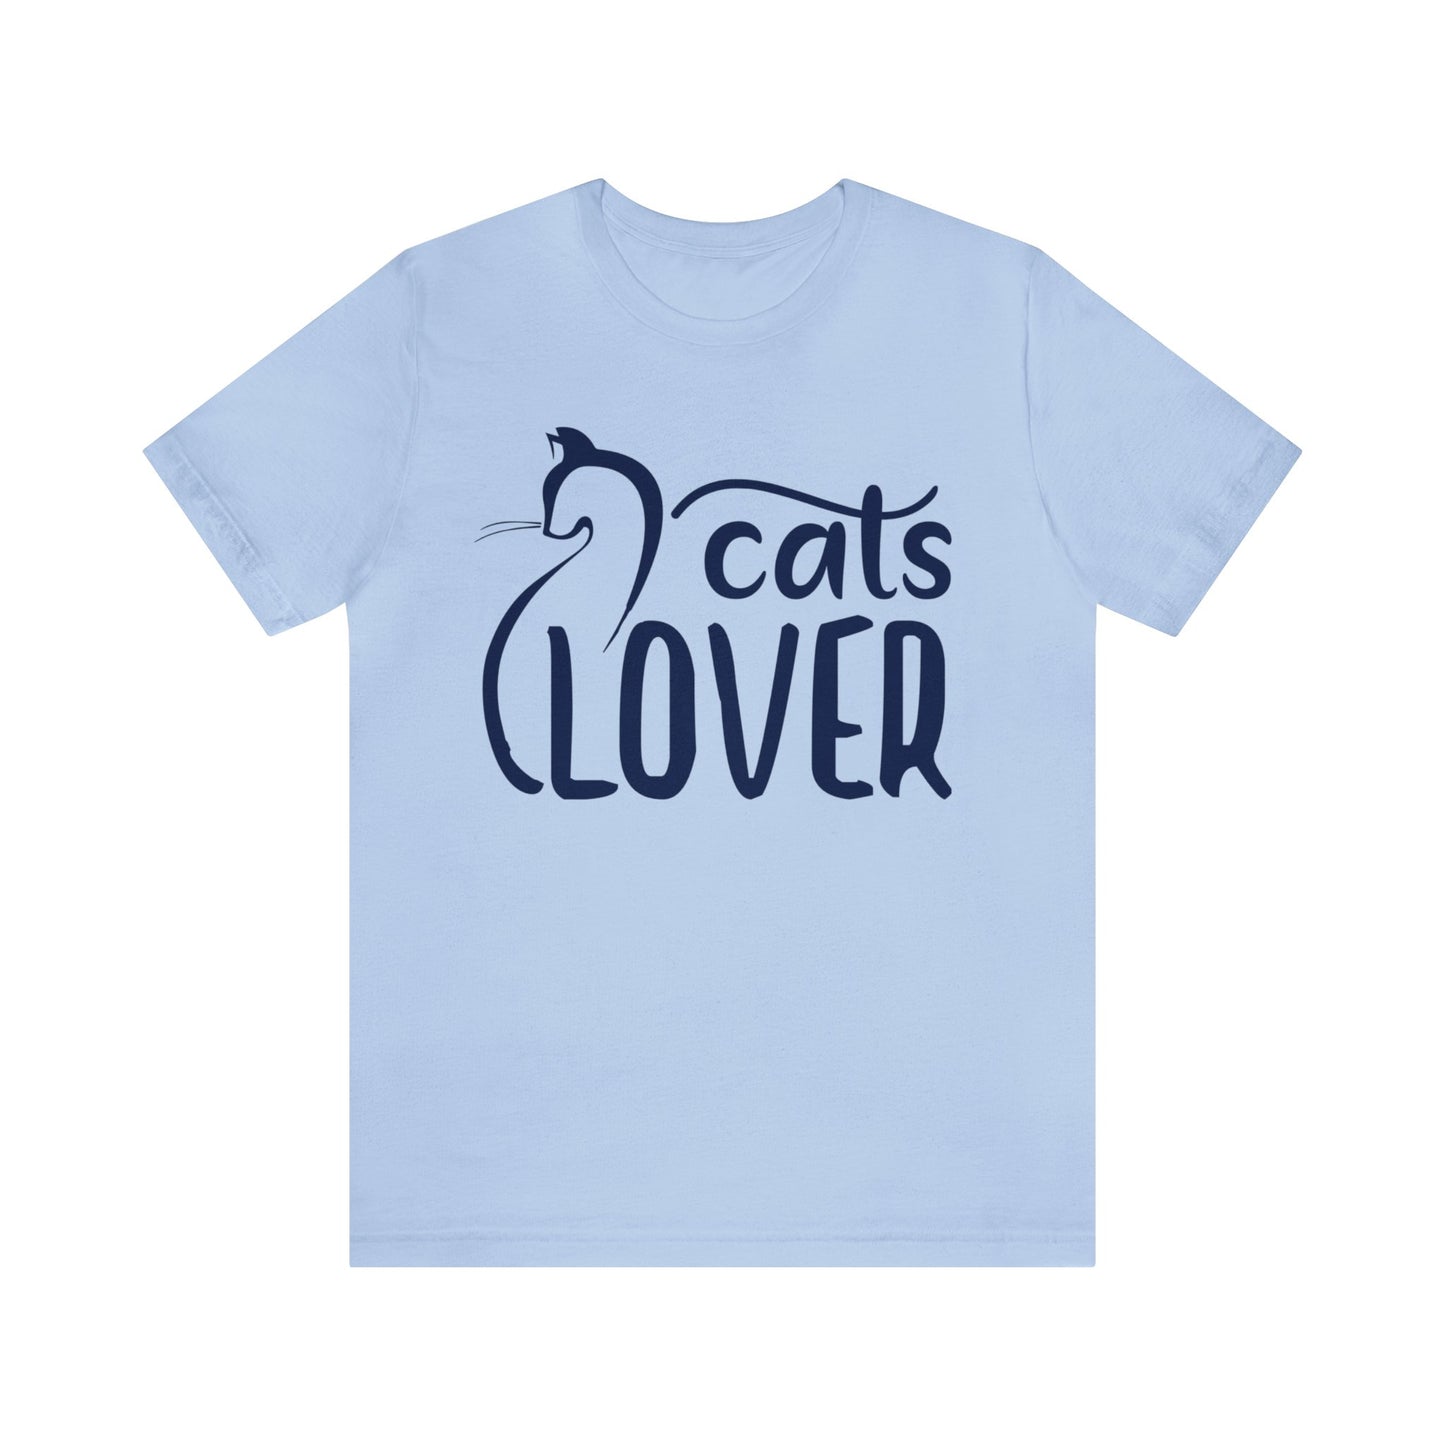 Cats Lover Collection - Trendy Cat T-Shirts for Feline Enthusiasts!